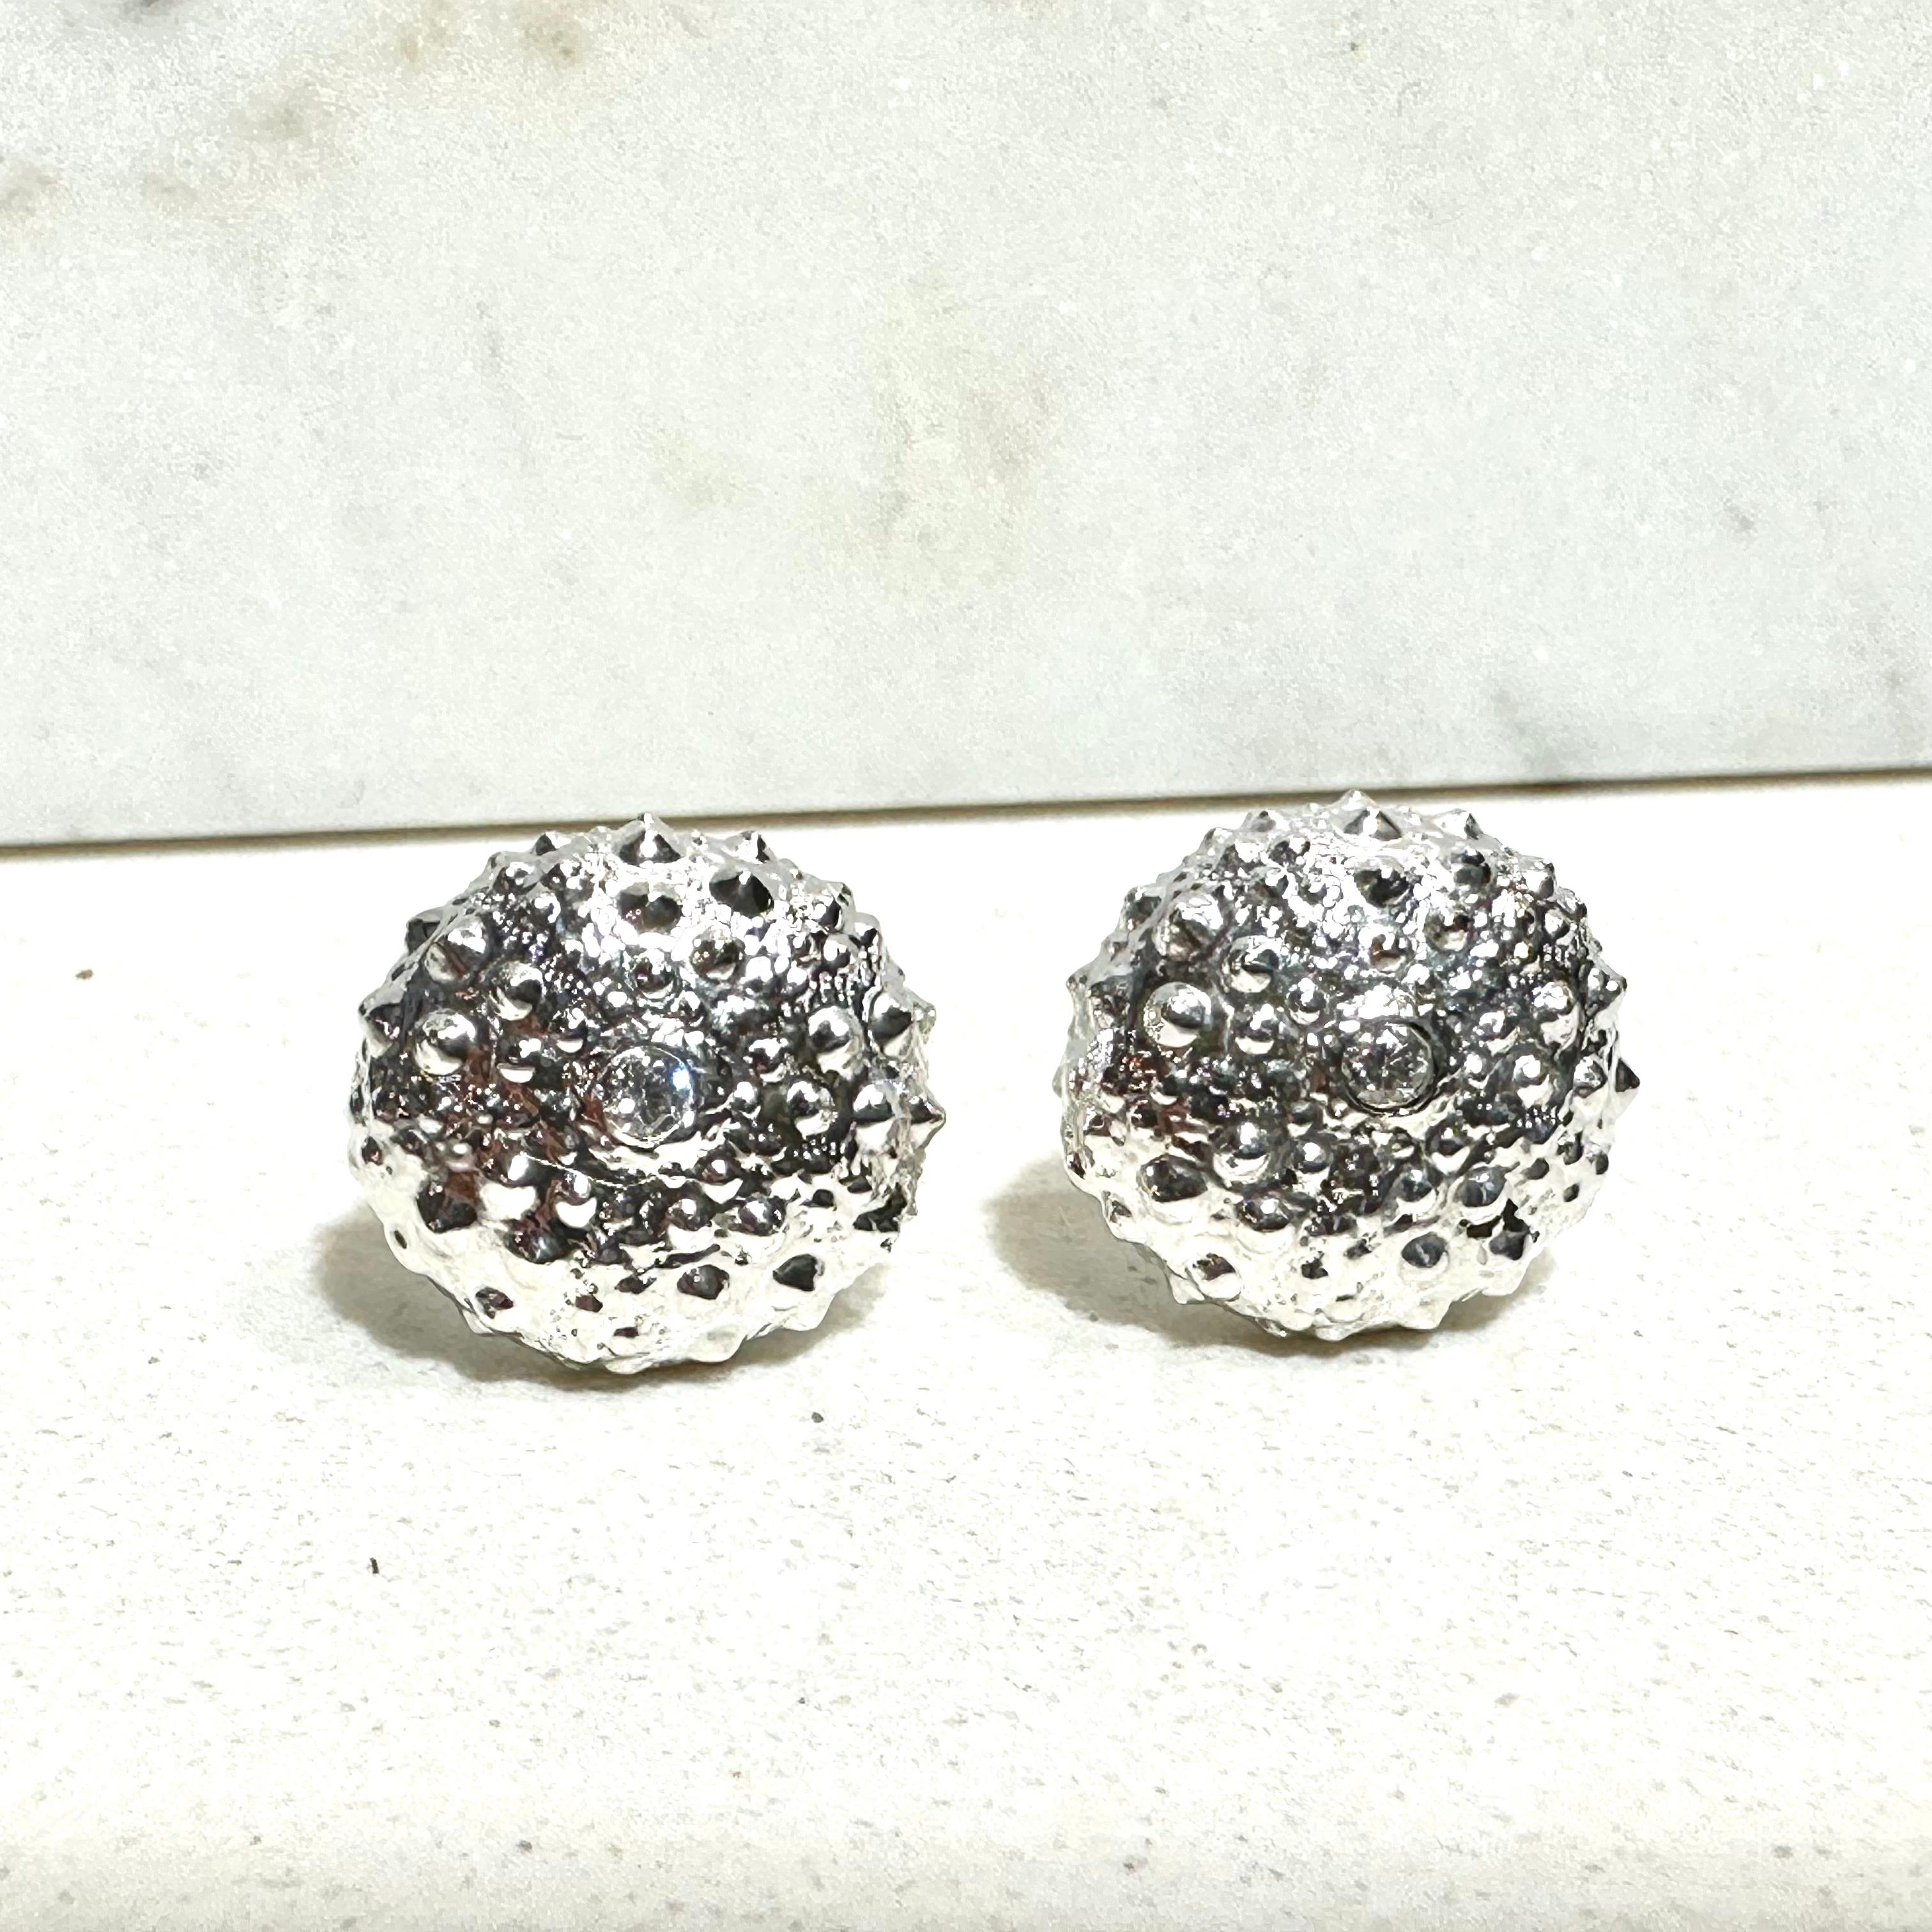 Kristin Hanson's sterling silver sea urchin stud earrings are handcrafted and cast from the natural shell form. With 14k yellow gold posts and sterling silver push back closure. Elegant and earthy treasure perfect for resort and summer looks. 